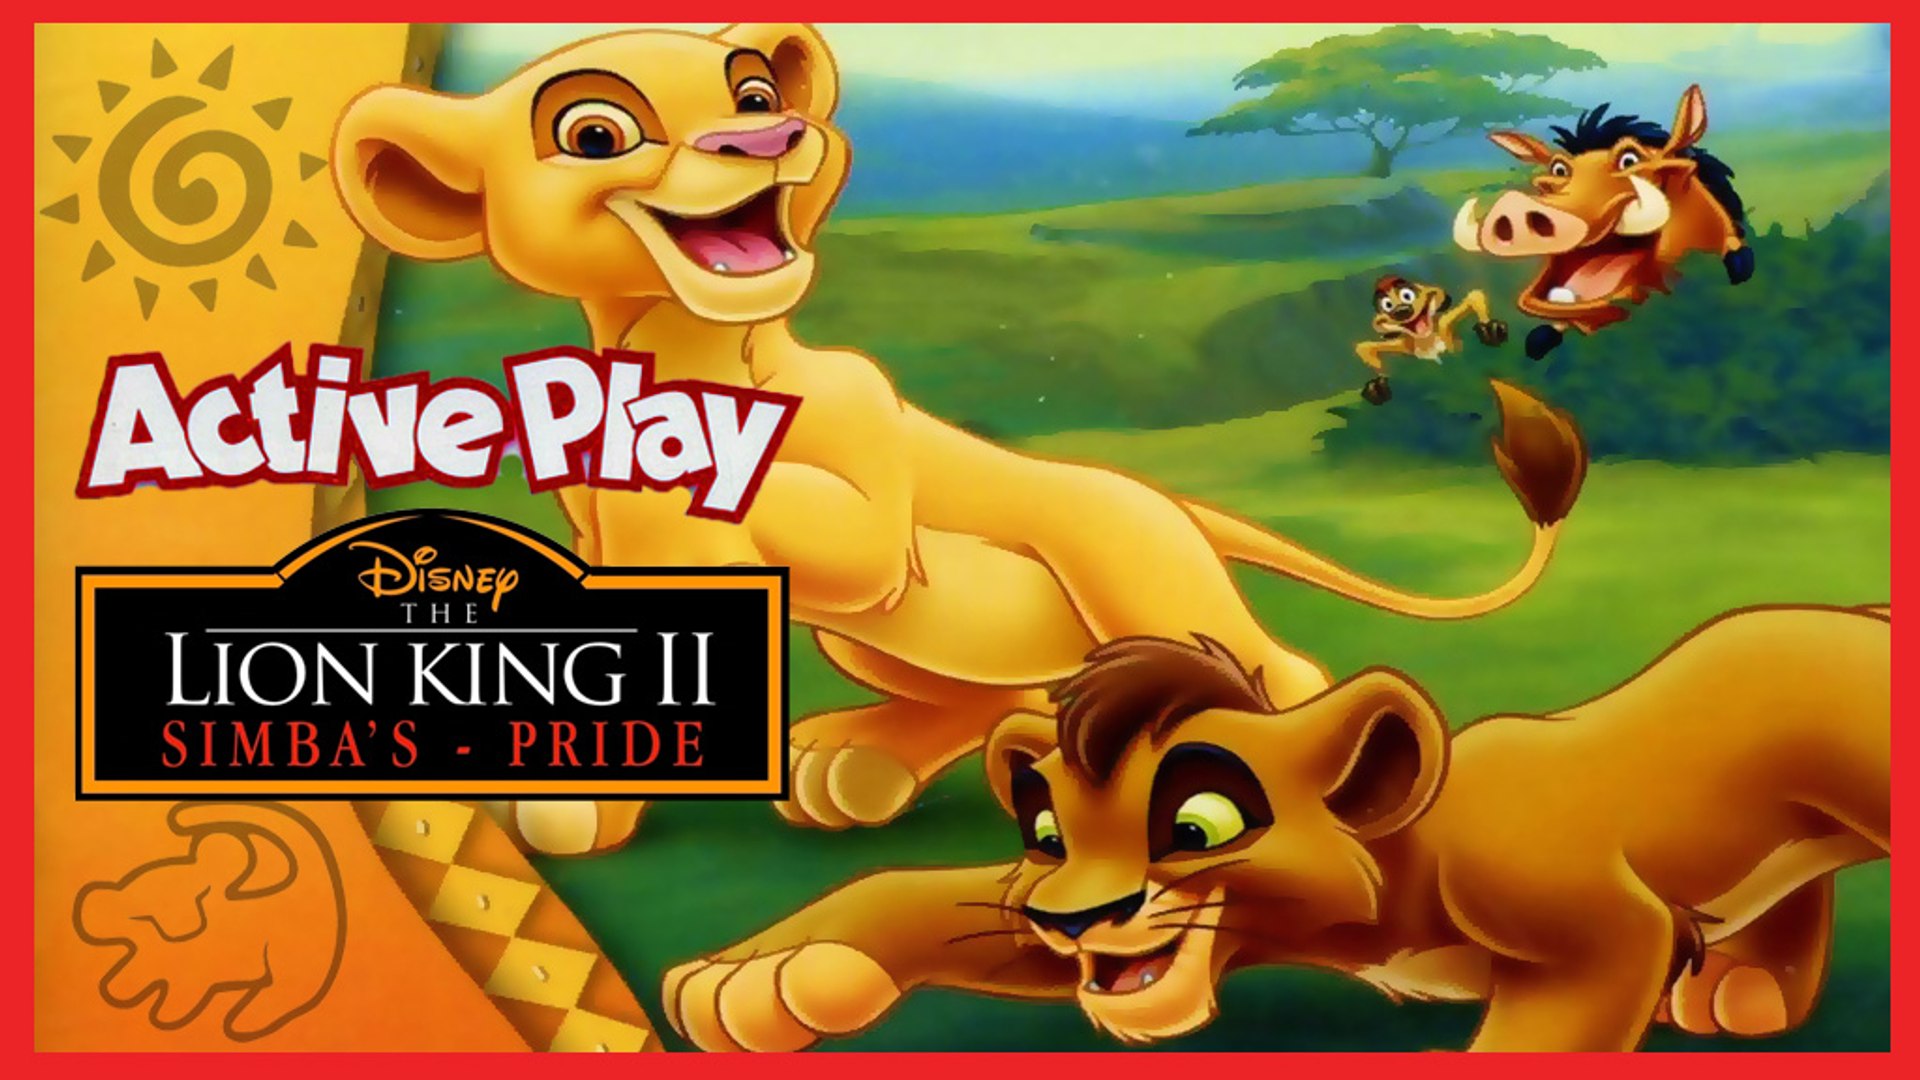 Disney's The Lion King II: Simba's Pride - Active Play Full Game Longplay  (PC) - video Dailymotion